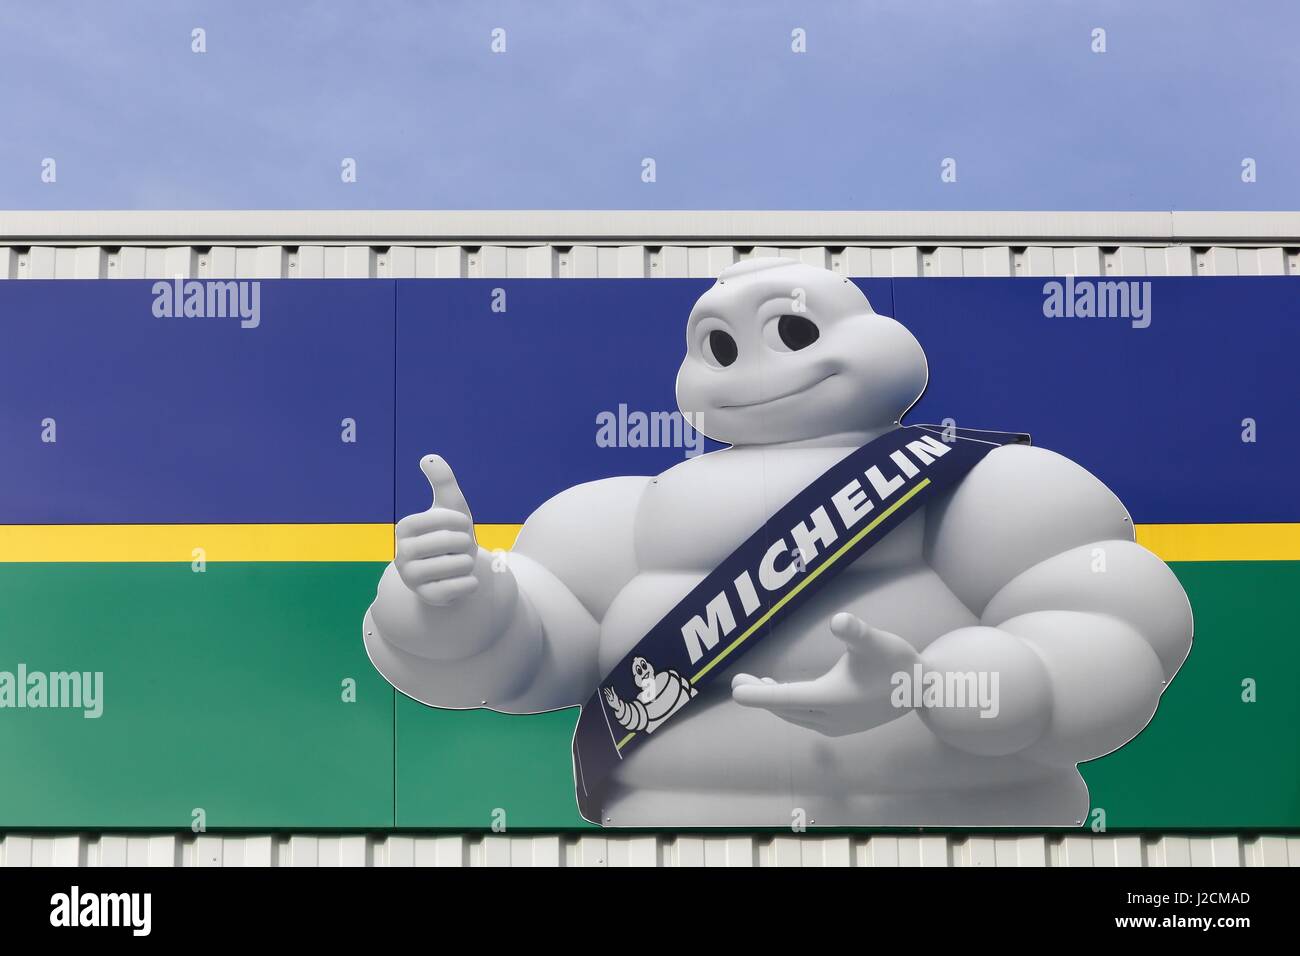 Villefranche, France - February 12, 2017: Michelin logo on a wall. Michelin is a tire manufacturer based in Clermont-Ferrand in France Stock Photo